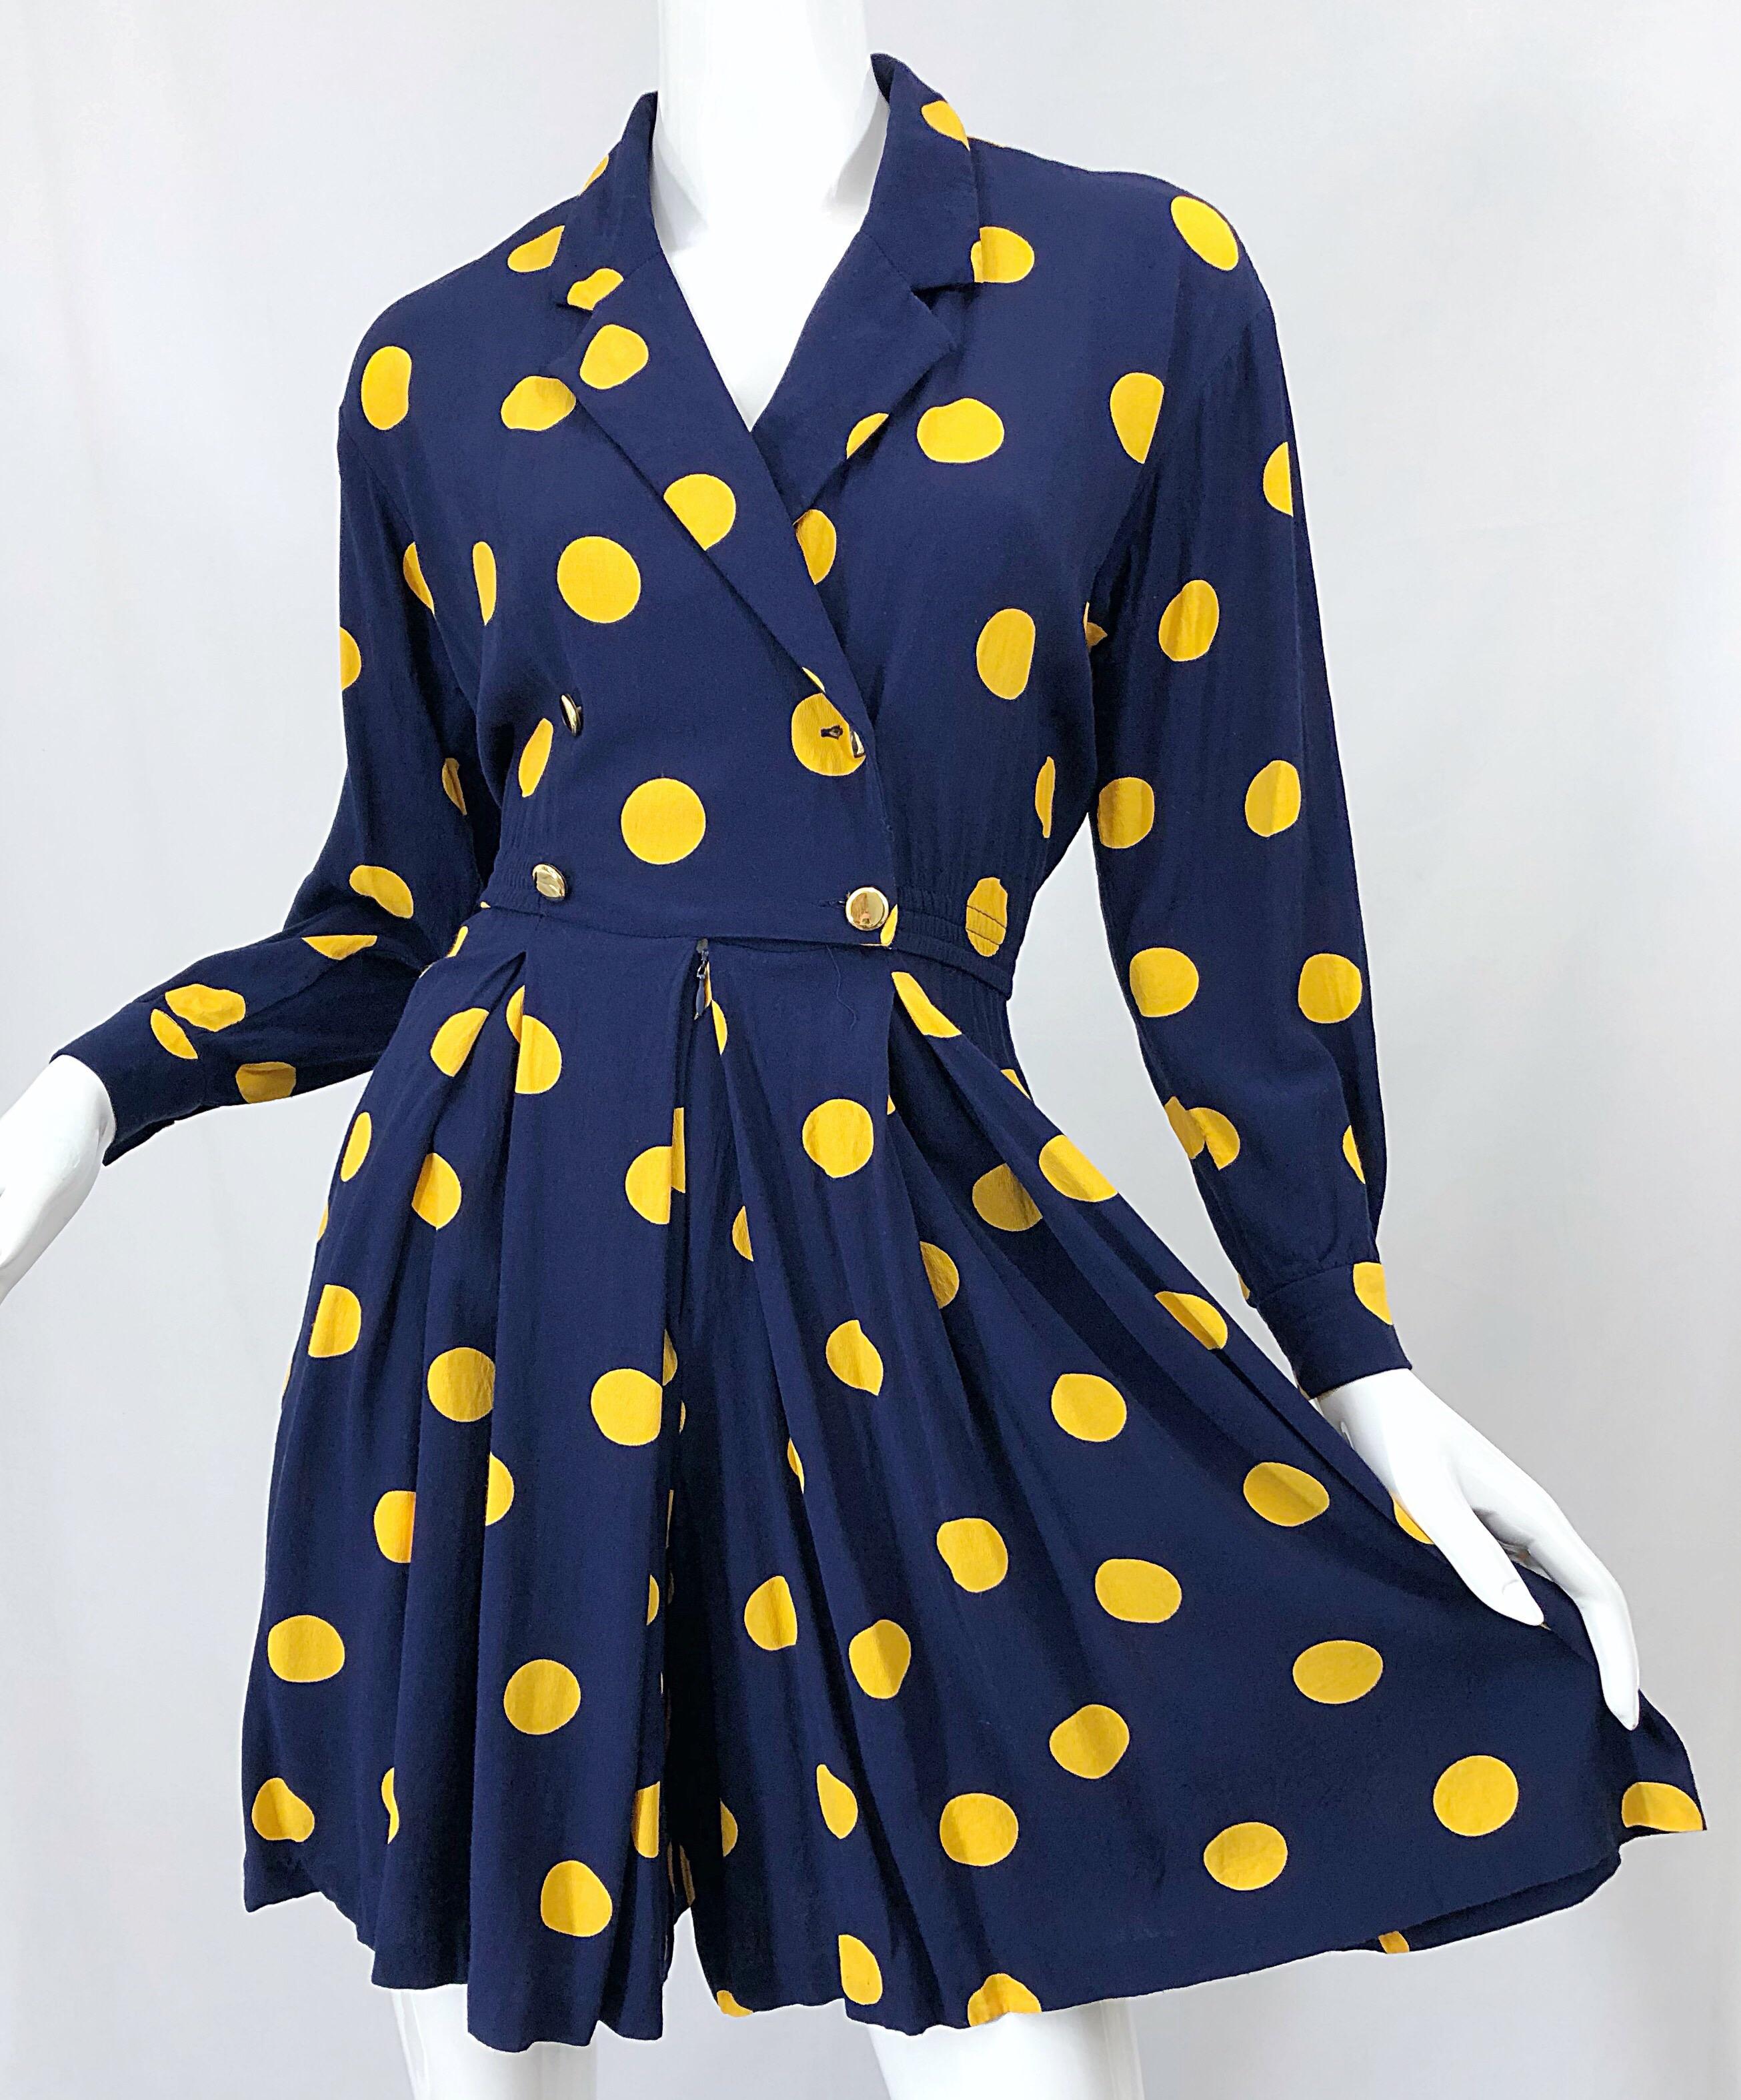 Size 8 Romper Late 1980s Navy Blue and Yellow Polka Dot 80s Vintage Romper 9